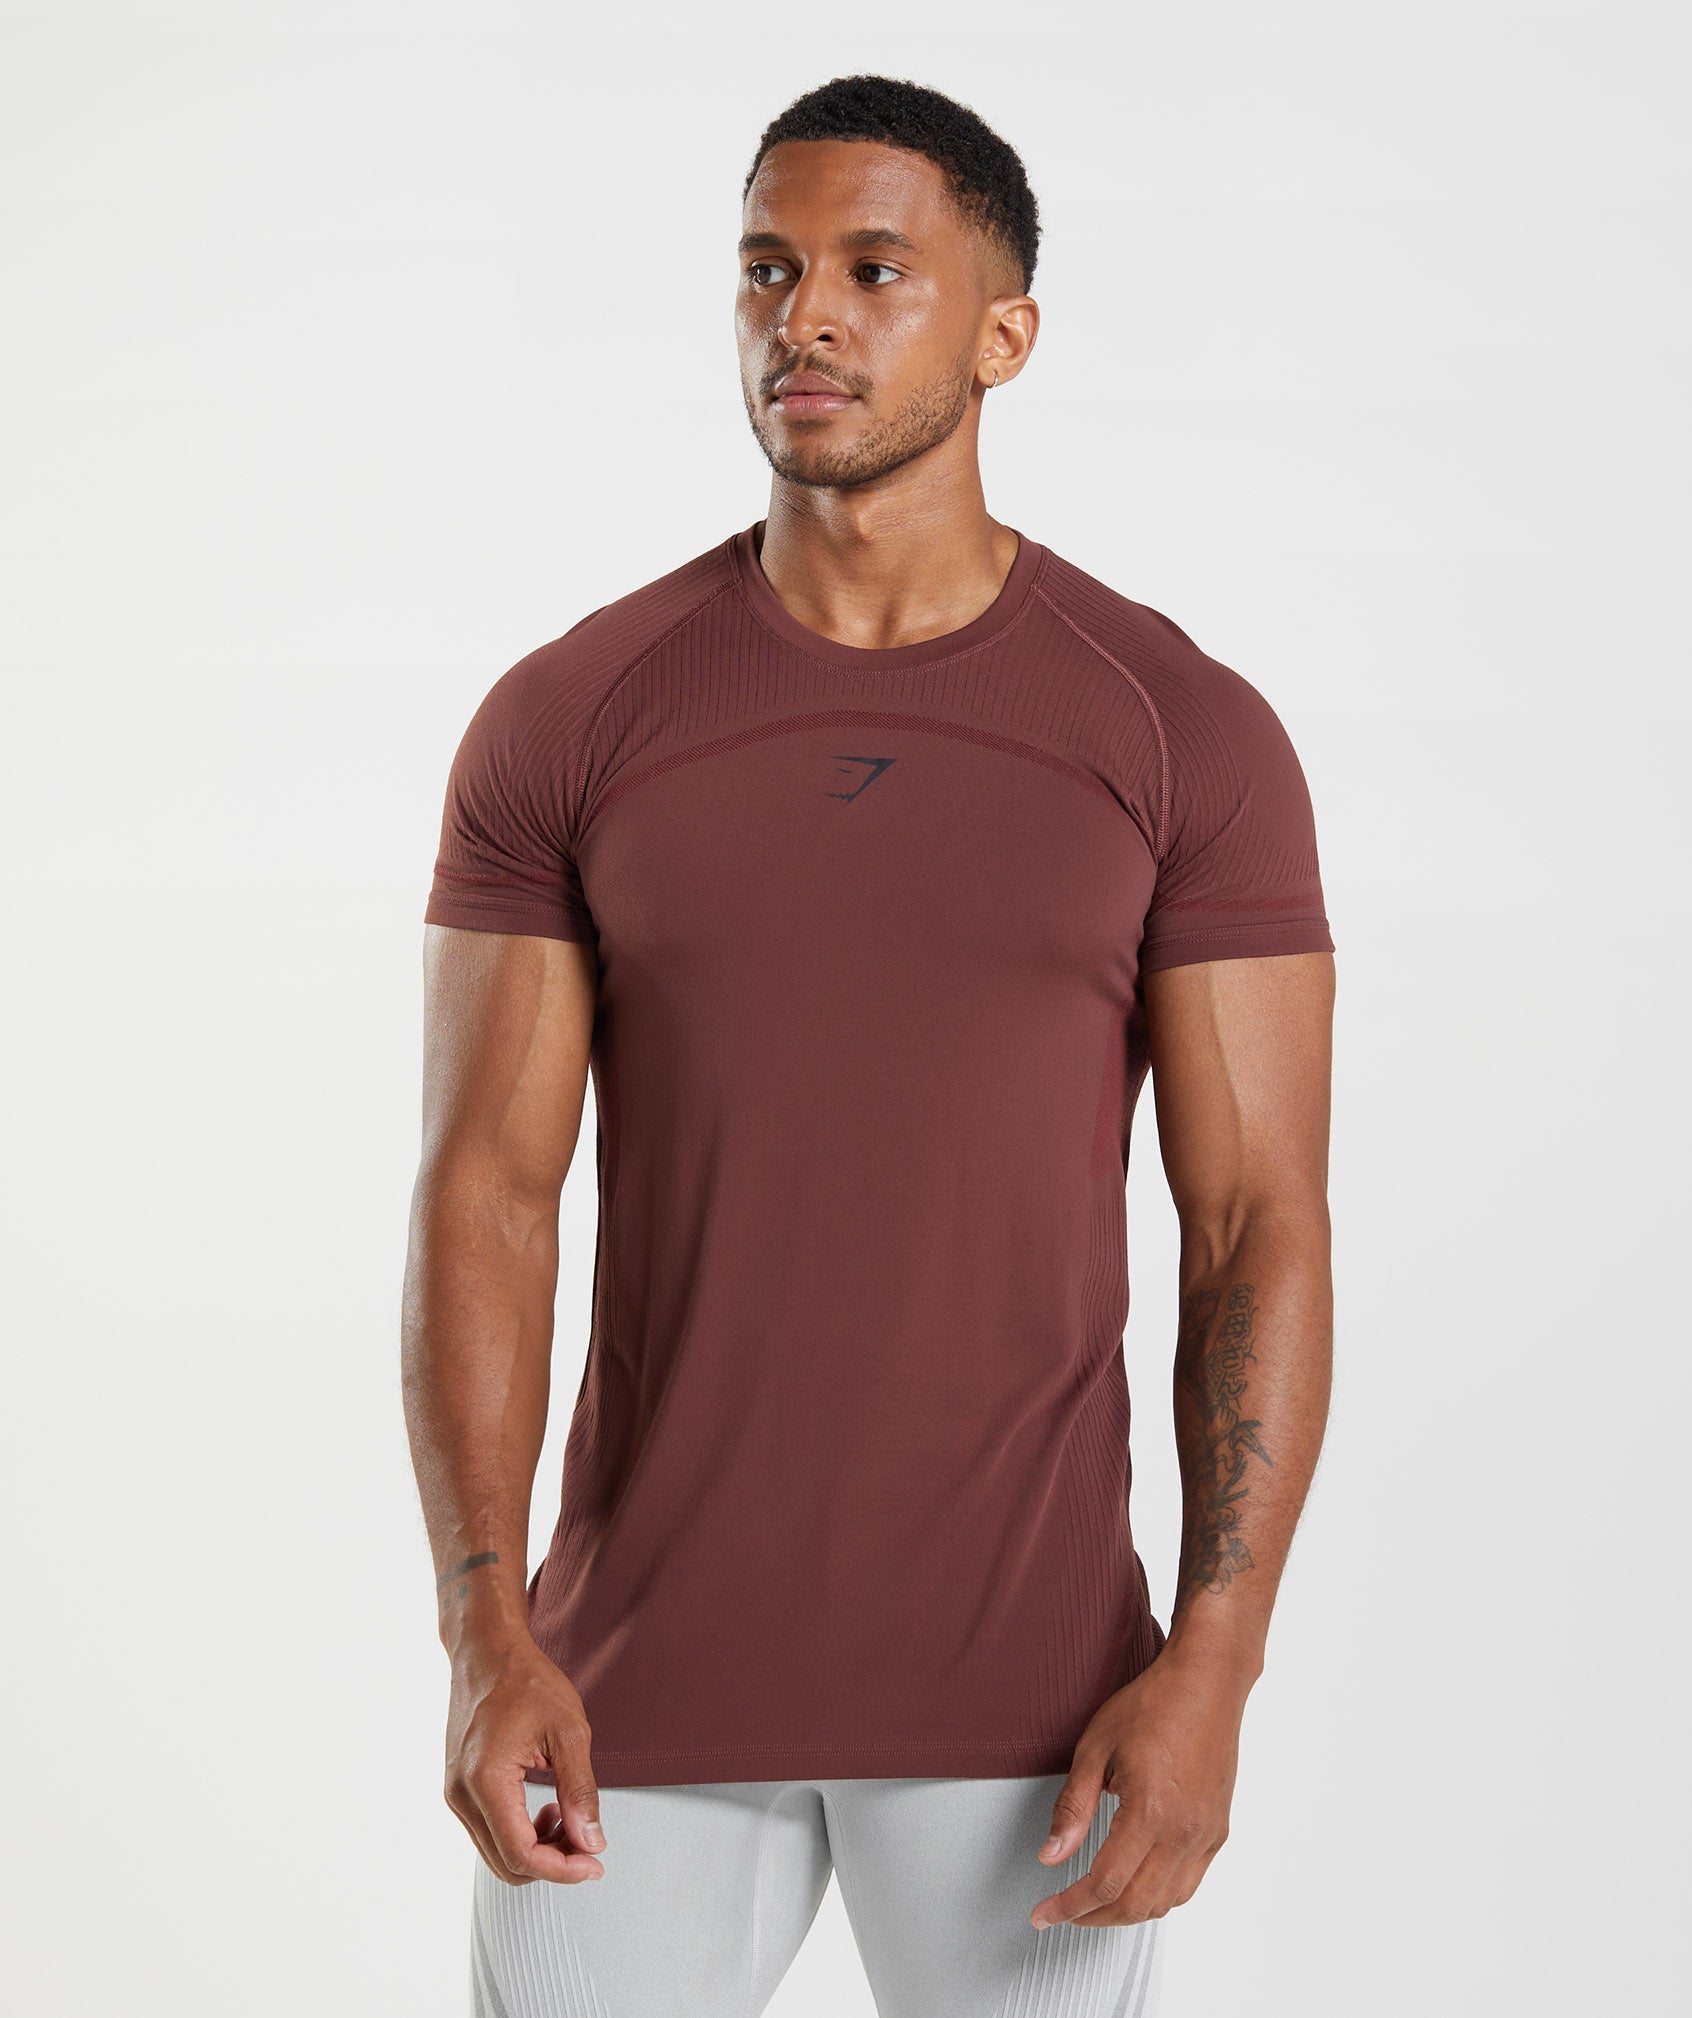 315 Seamless T-Shirt in Cherry Brown